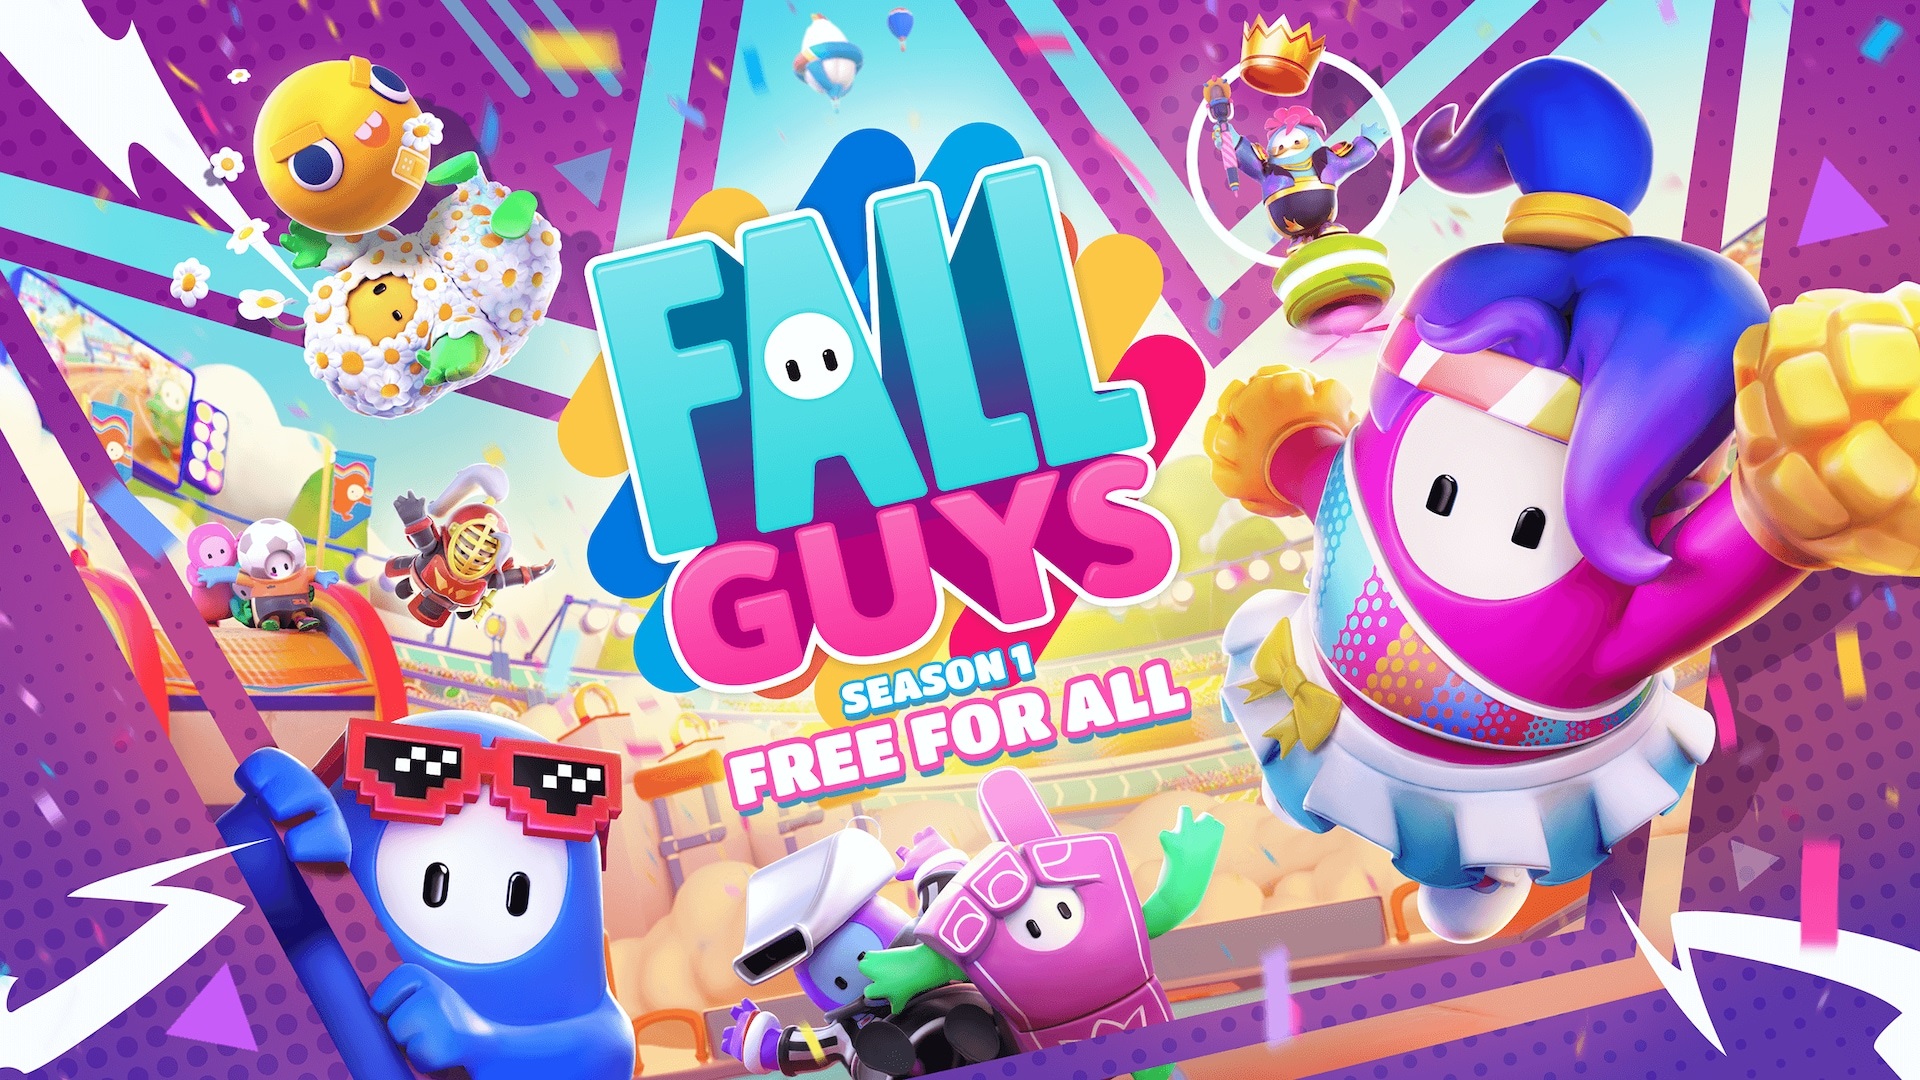 Fall Guys is going free to play